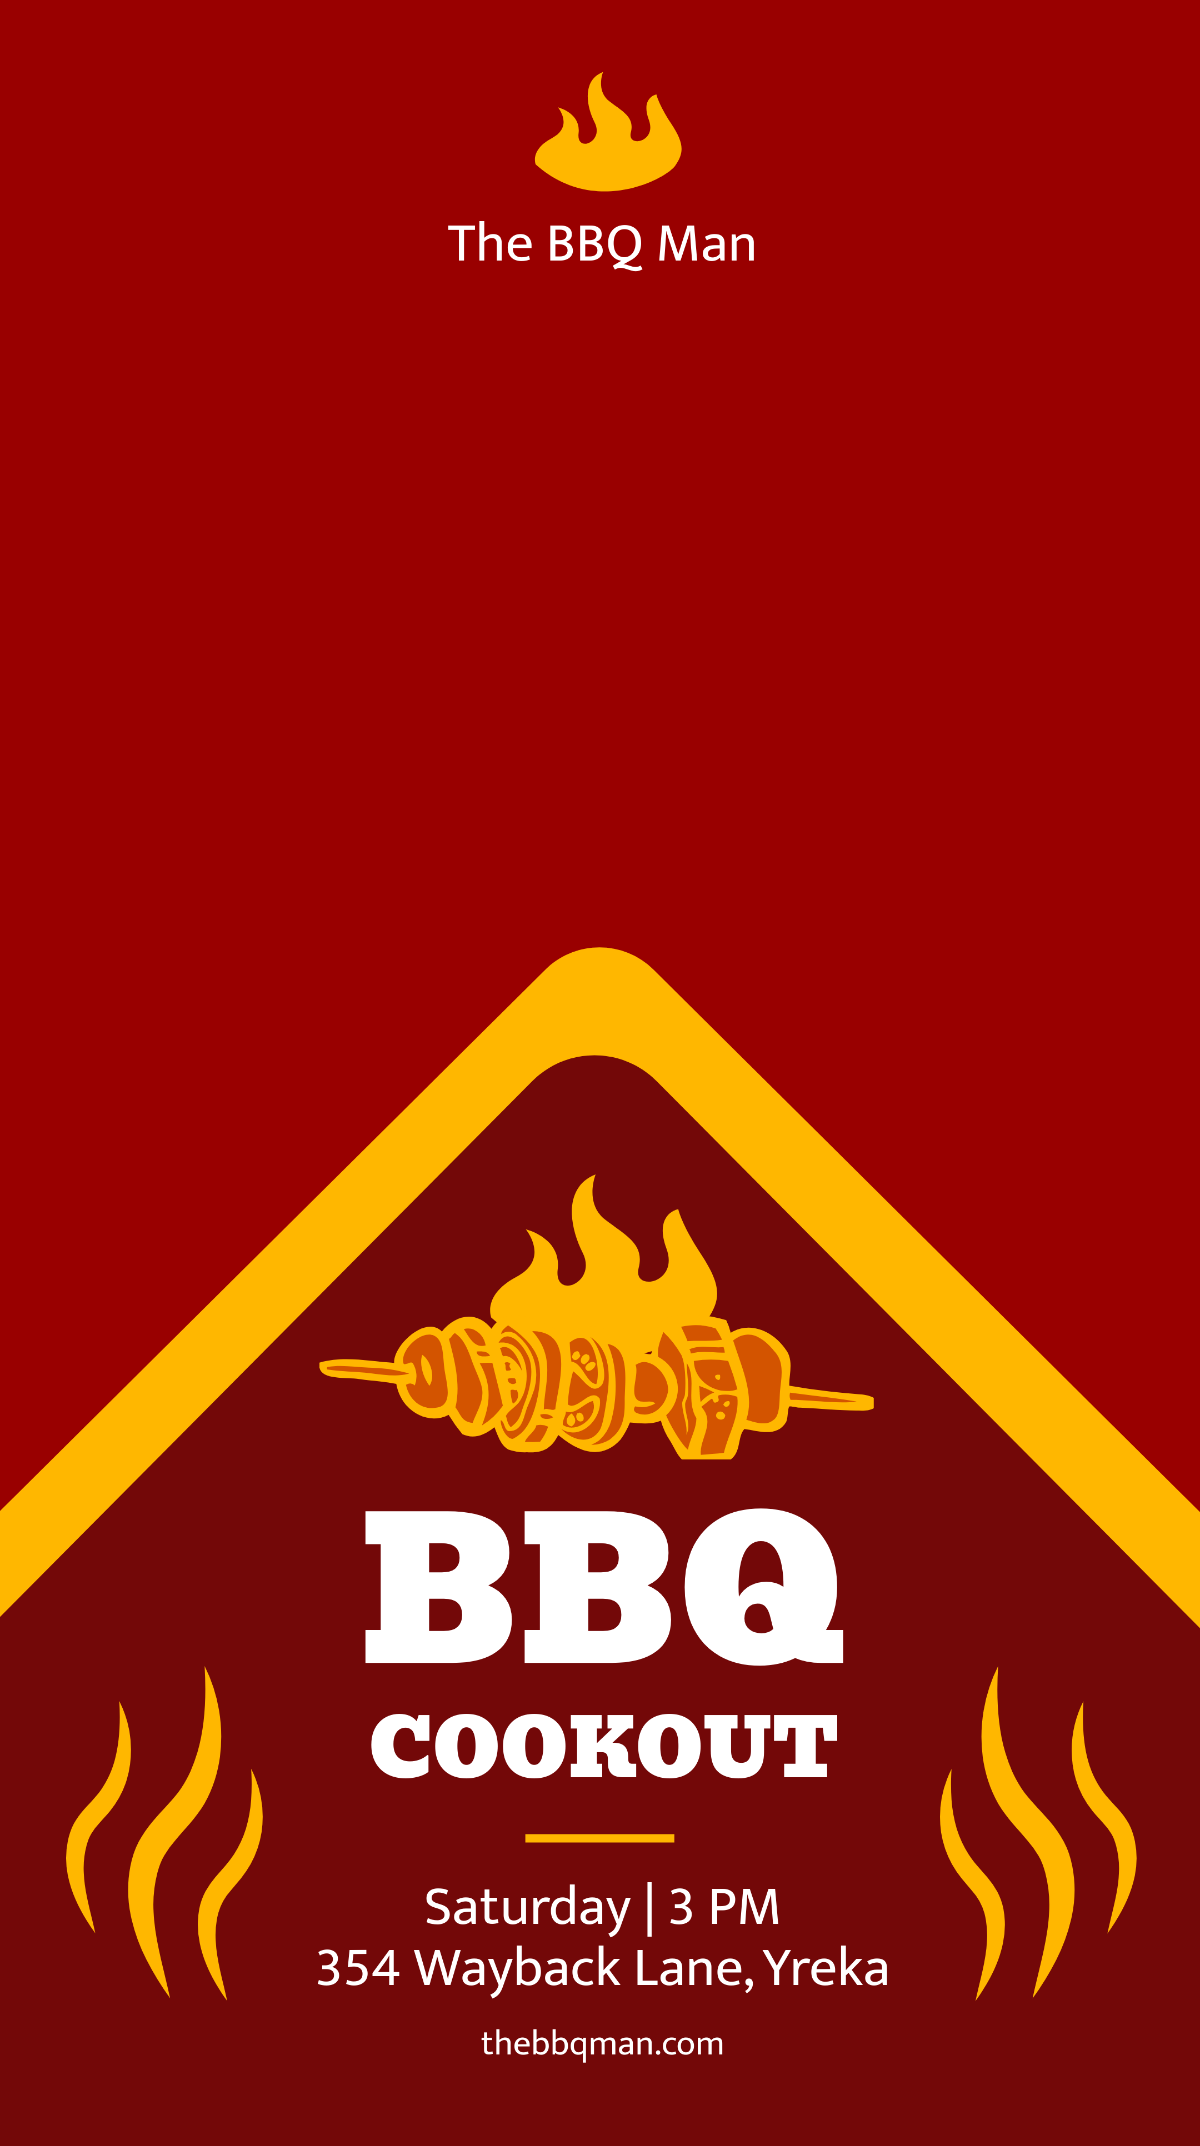 Free BBQ Cookout Snapchat Geofilter Template